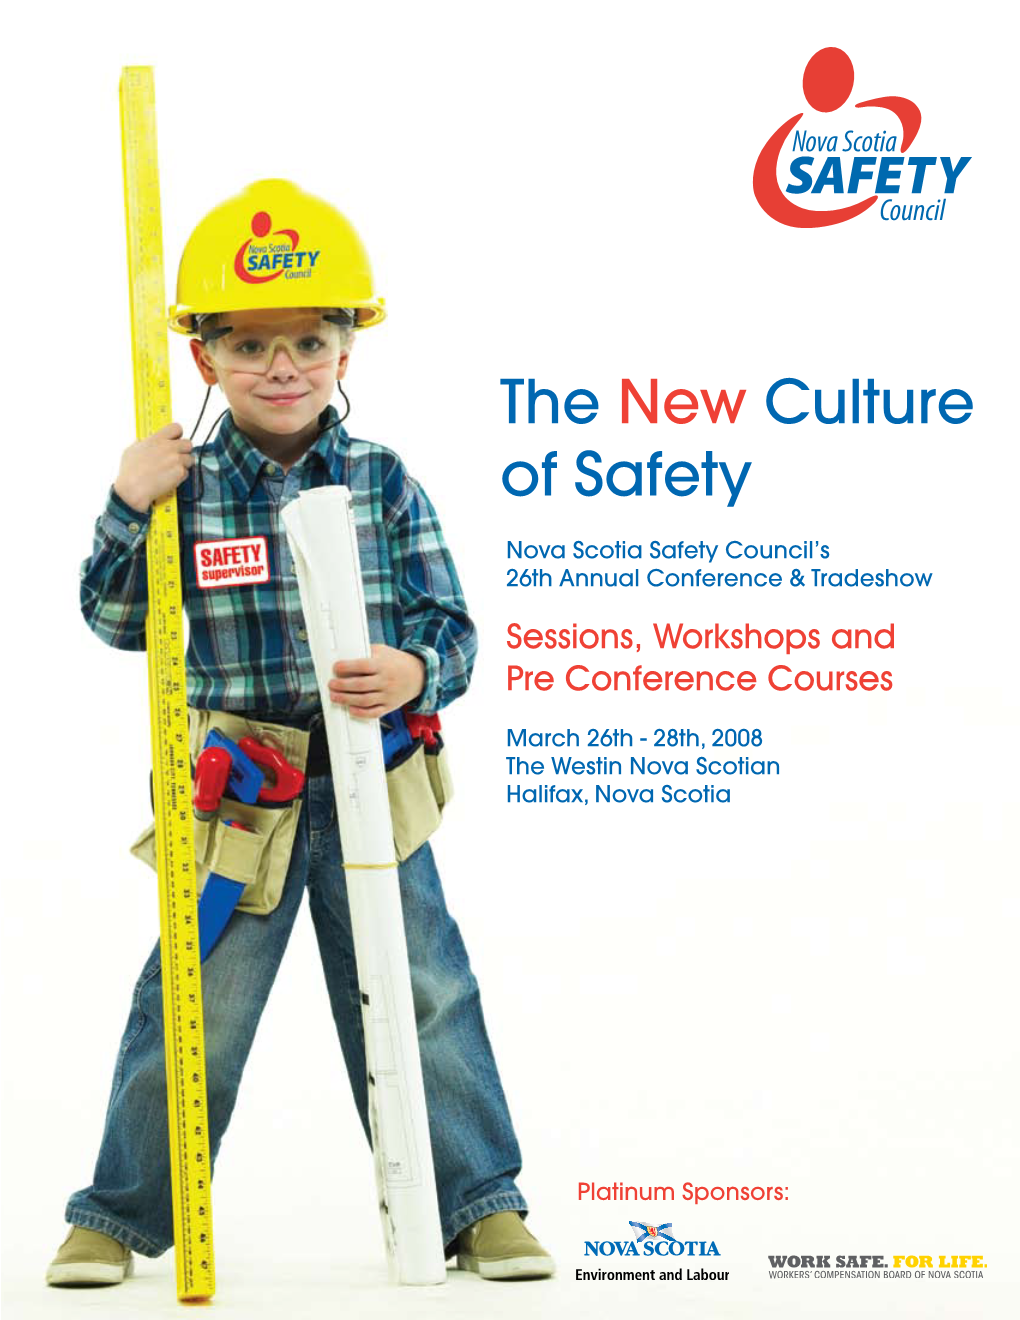 The New Culture of Safety